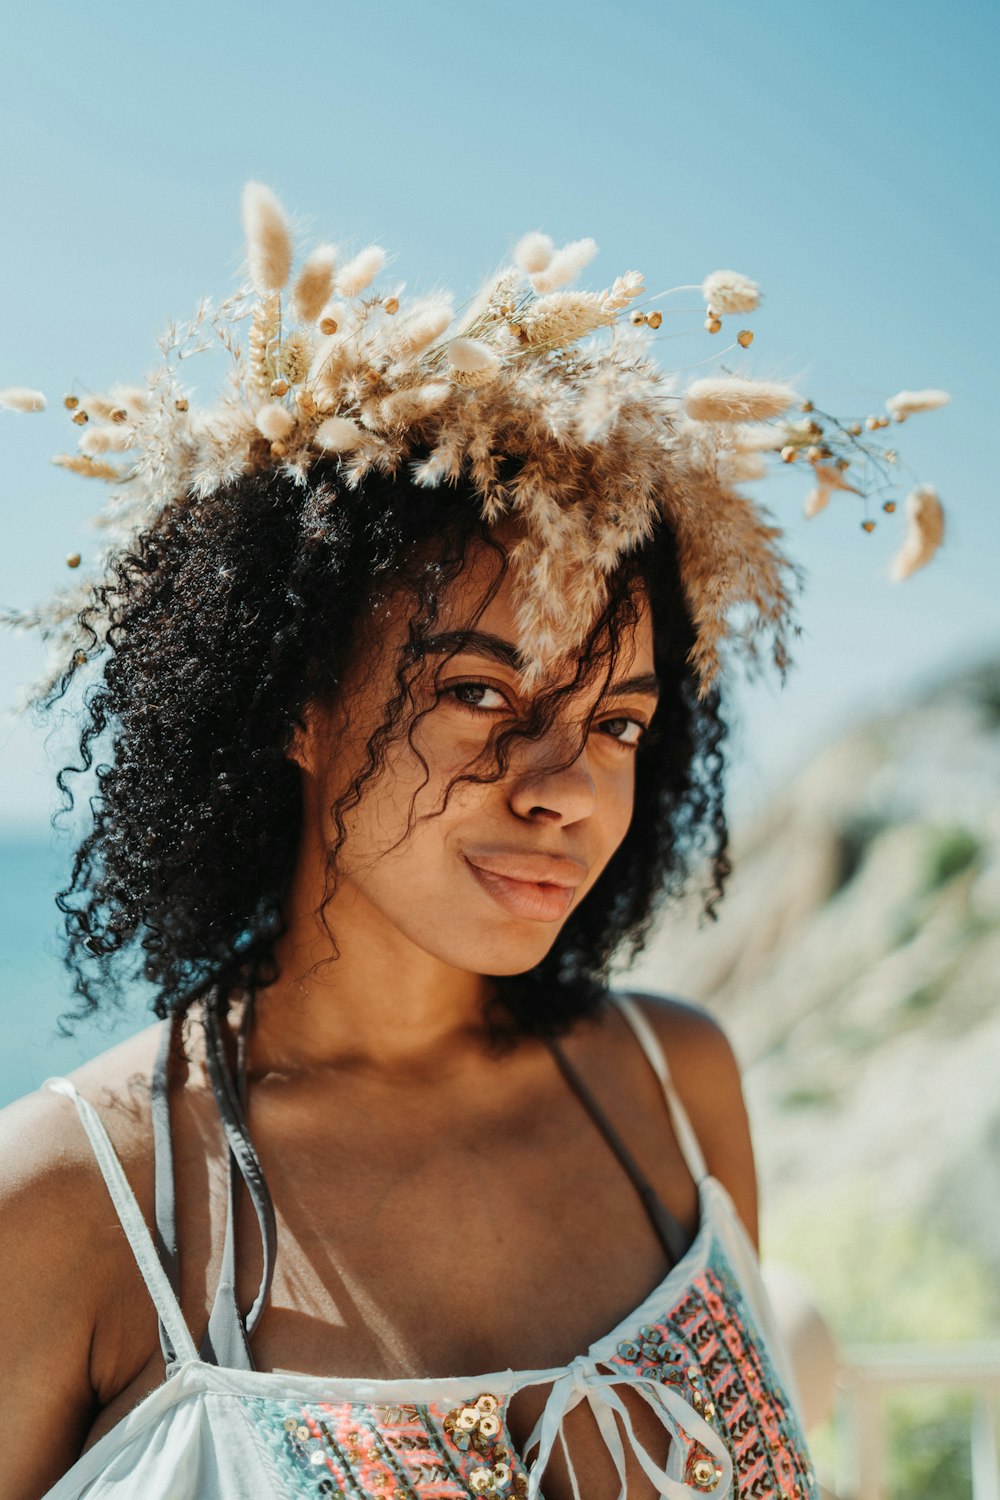 a woman with a flower crown on her head